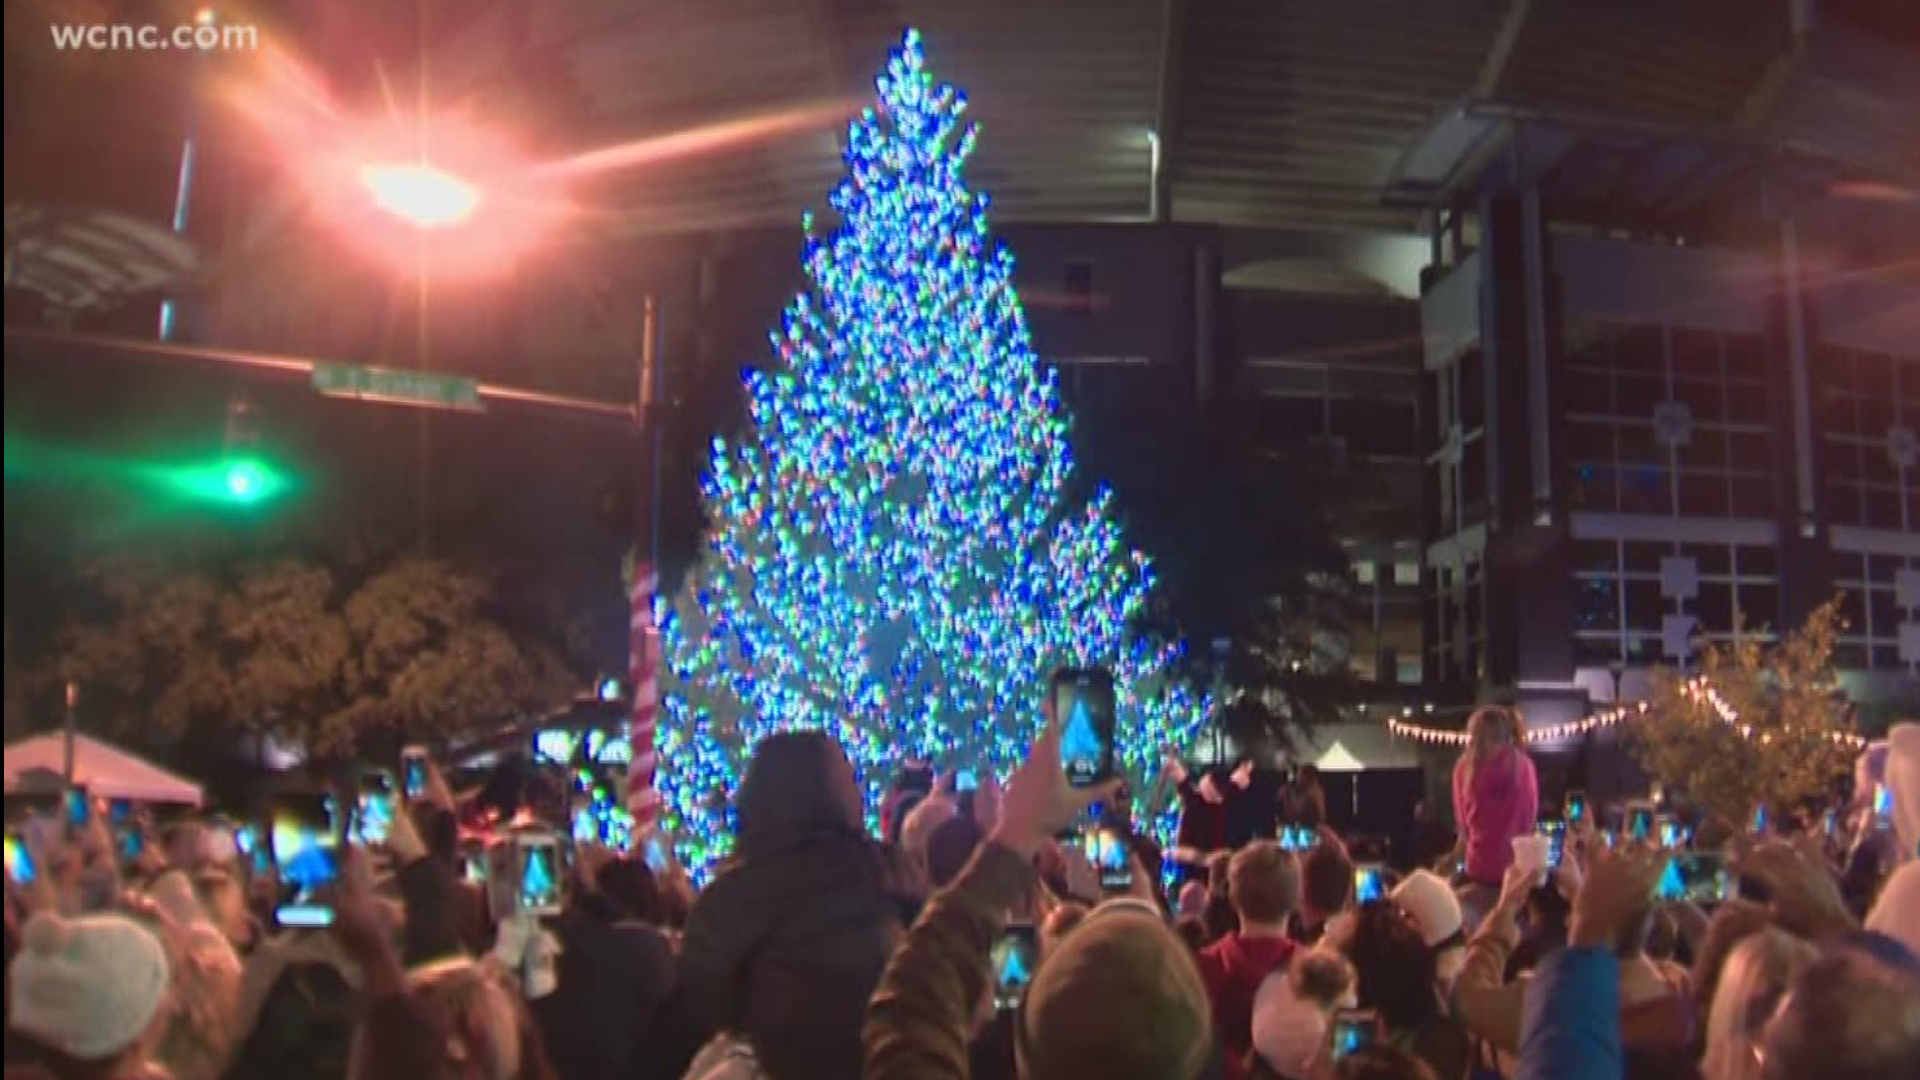 The Carolina Panthers ushered in the holiday season with their fifth annual Christmas tree lighting at Bank of America Stadium.